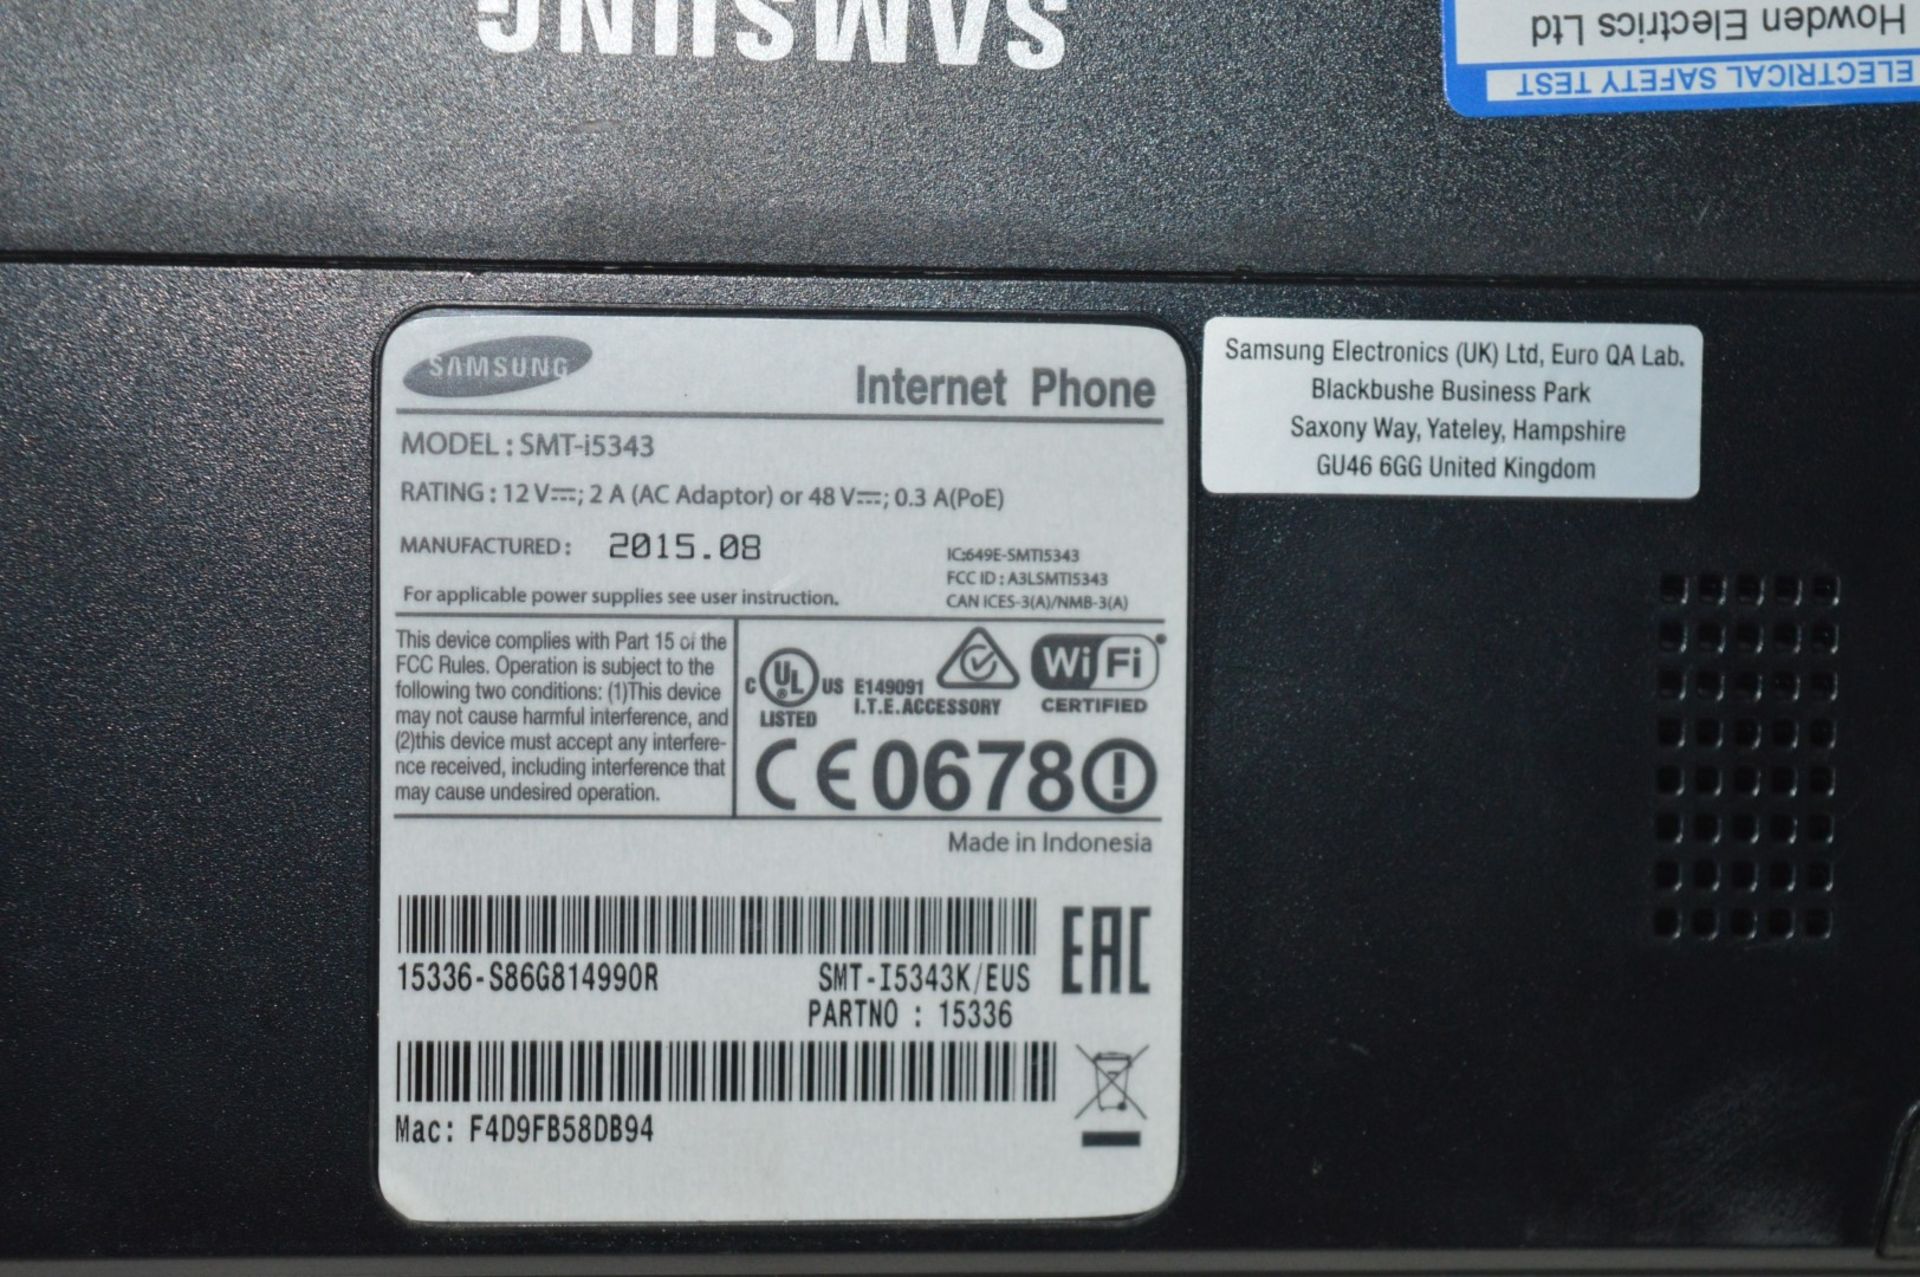 2 x Samsung SMT-i5343 IP Internet Phones with WiFi Ethernet Bluetooth & NFC - CL401 - Ref J1557/ - Image 7 of 7